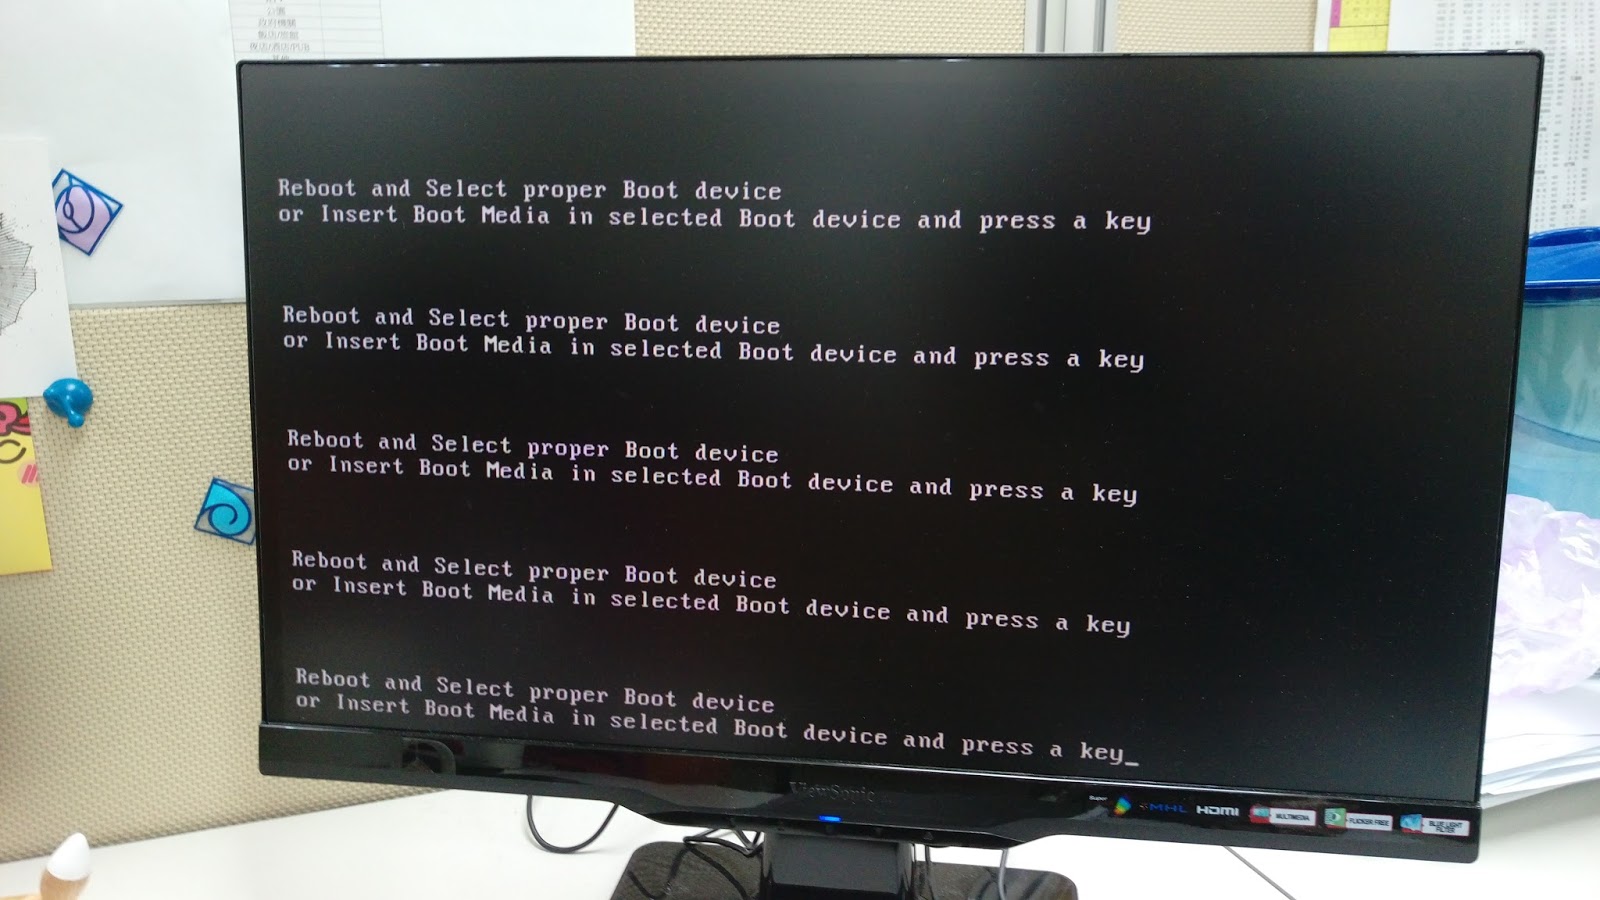 Windows 10 Gpt Reboot And Select Proper Boot Device